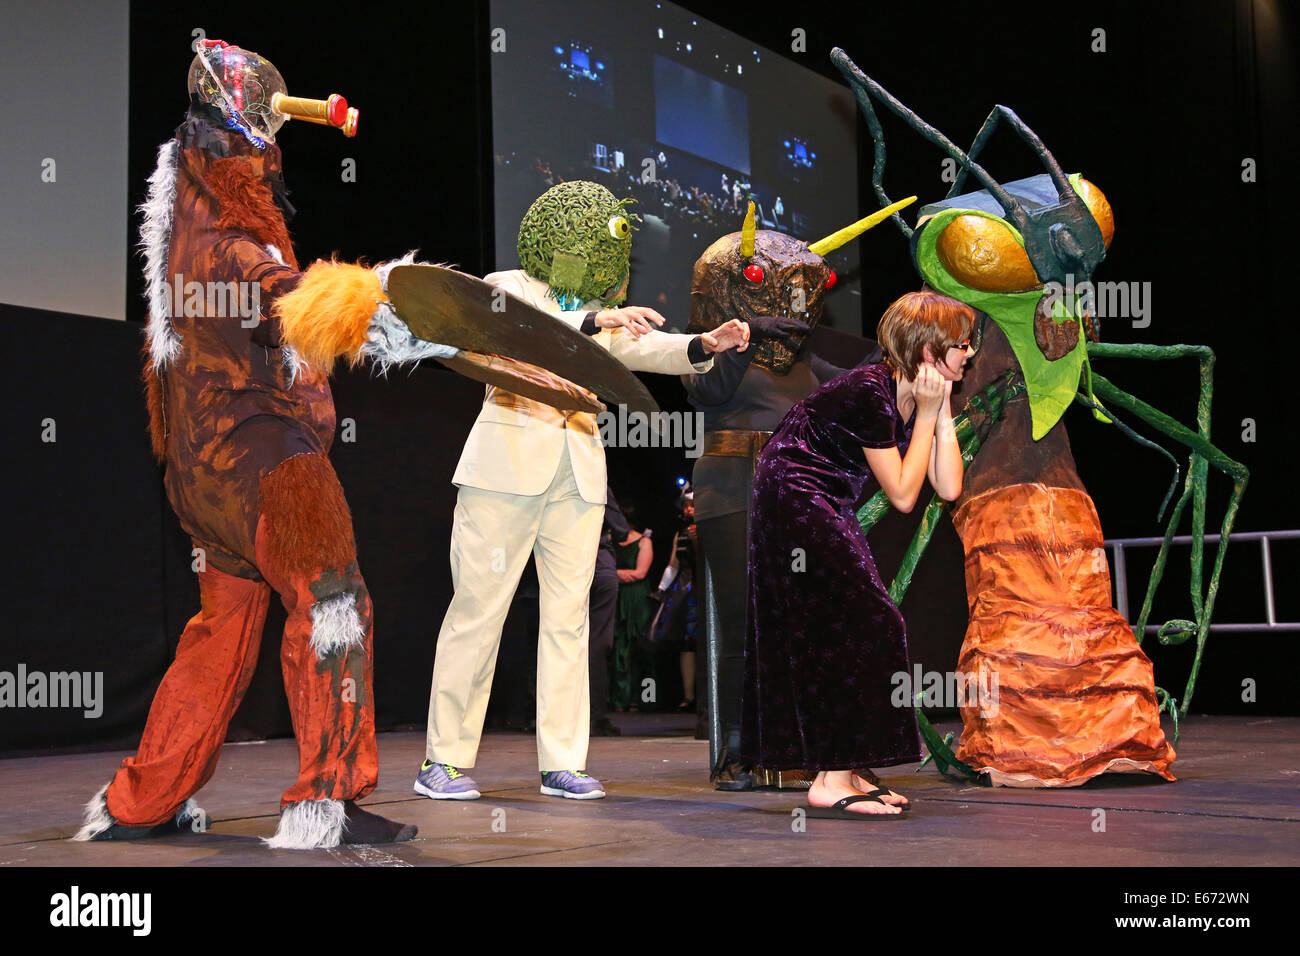 London, UK. 16th August 2014. The Loncon 3 Masquerade entry called 70s Dr Who Monsters who won the Best Re-Creation award in the novice category at Loncon 3 the 72nd World Science Fiction Convention in London, England Credit:  Paul Brown/Alamy Live News Stock Photo